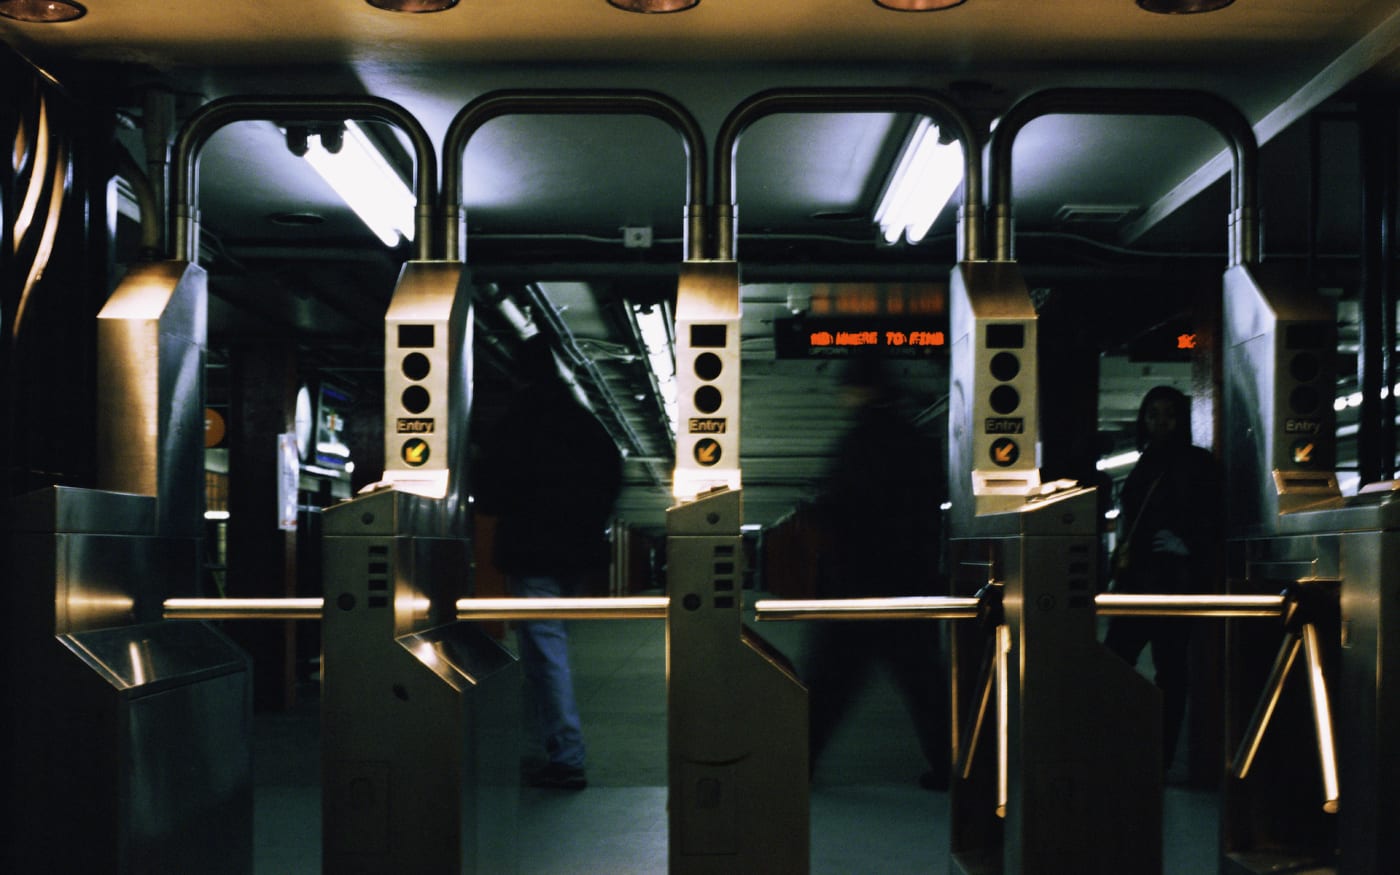 Queens subway fare evader’s repeated attempts to jump turnstile result in fatal fall